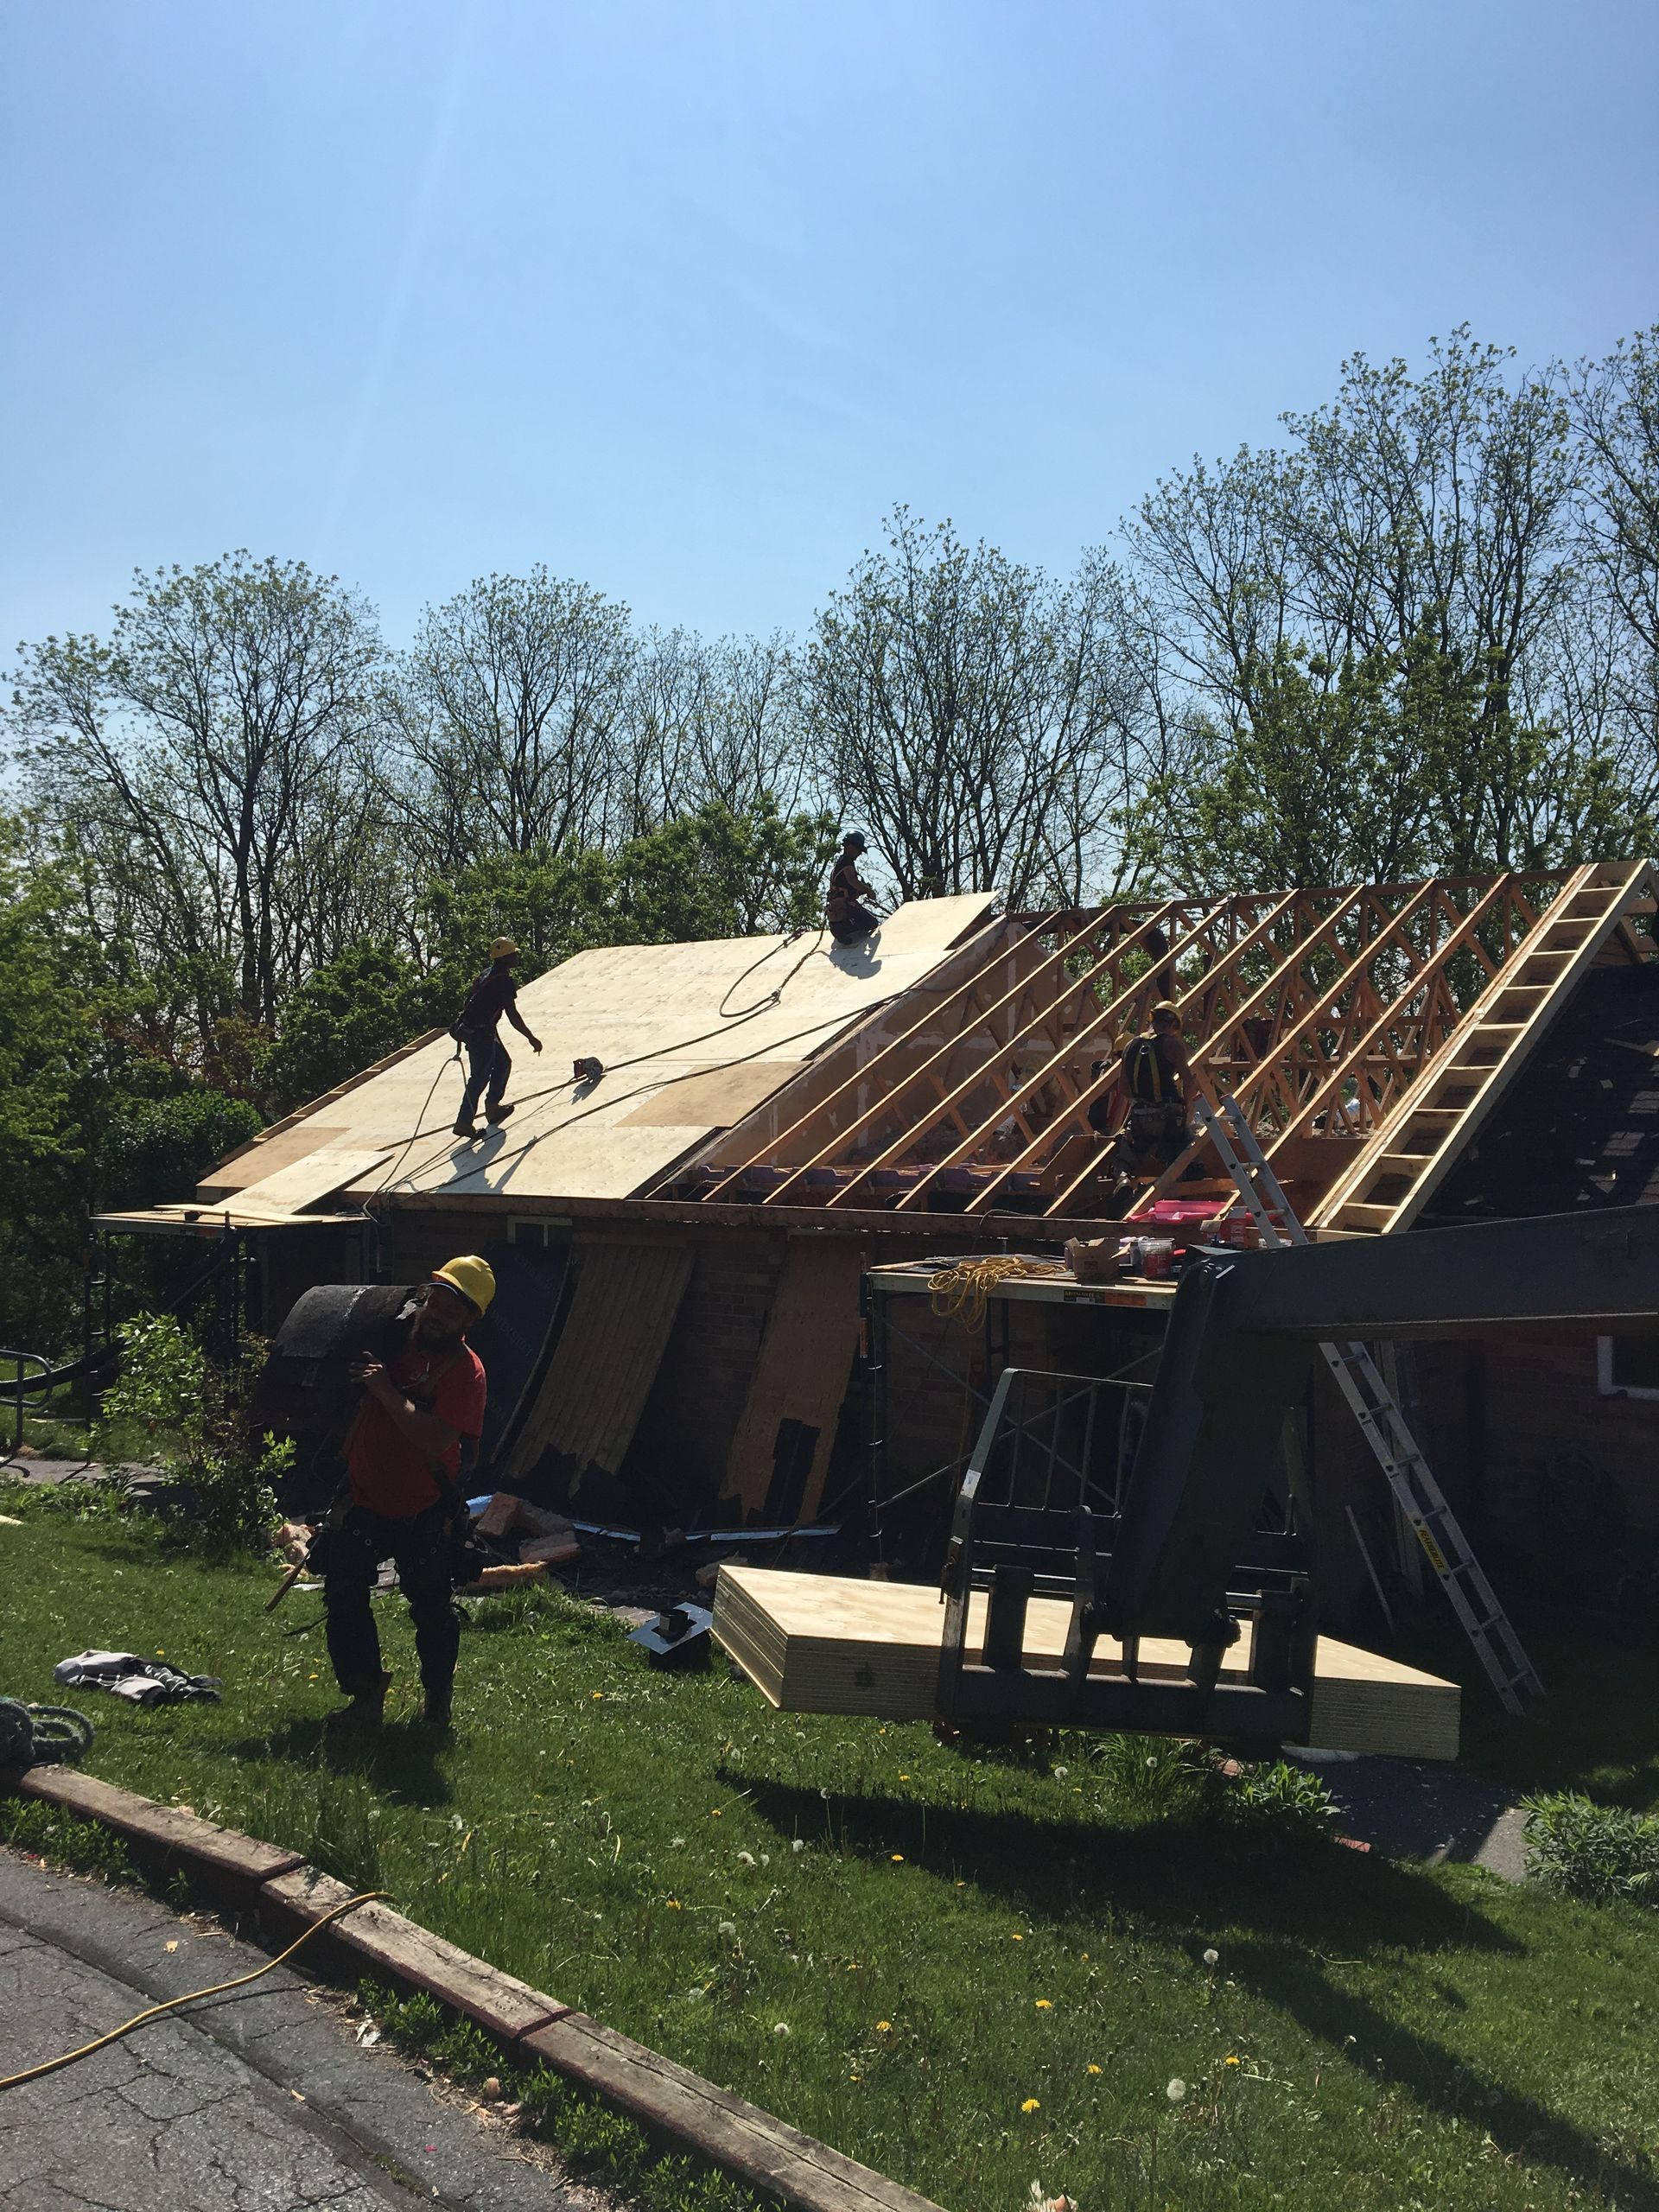 A group of people are working on the roof of a house.